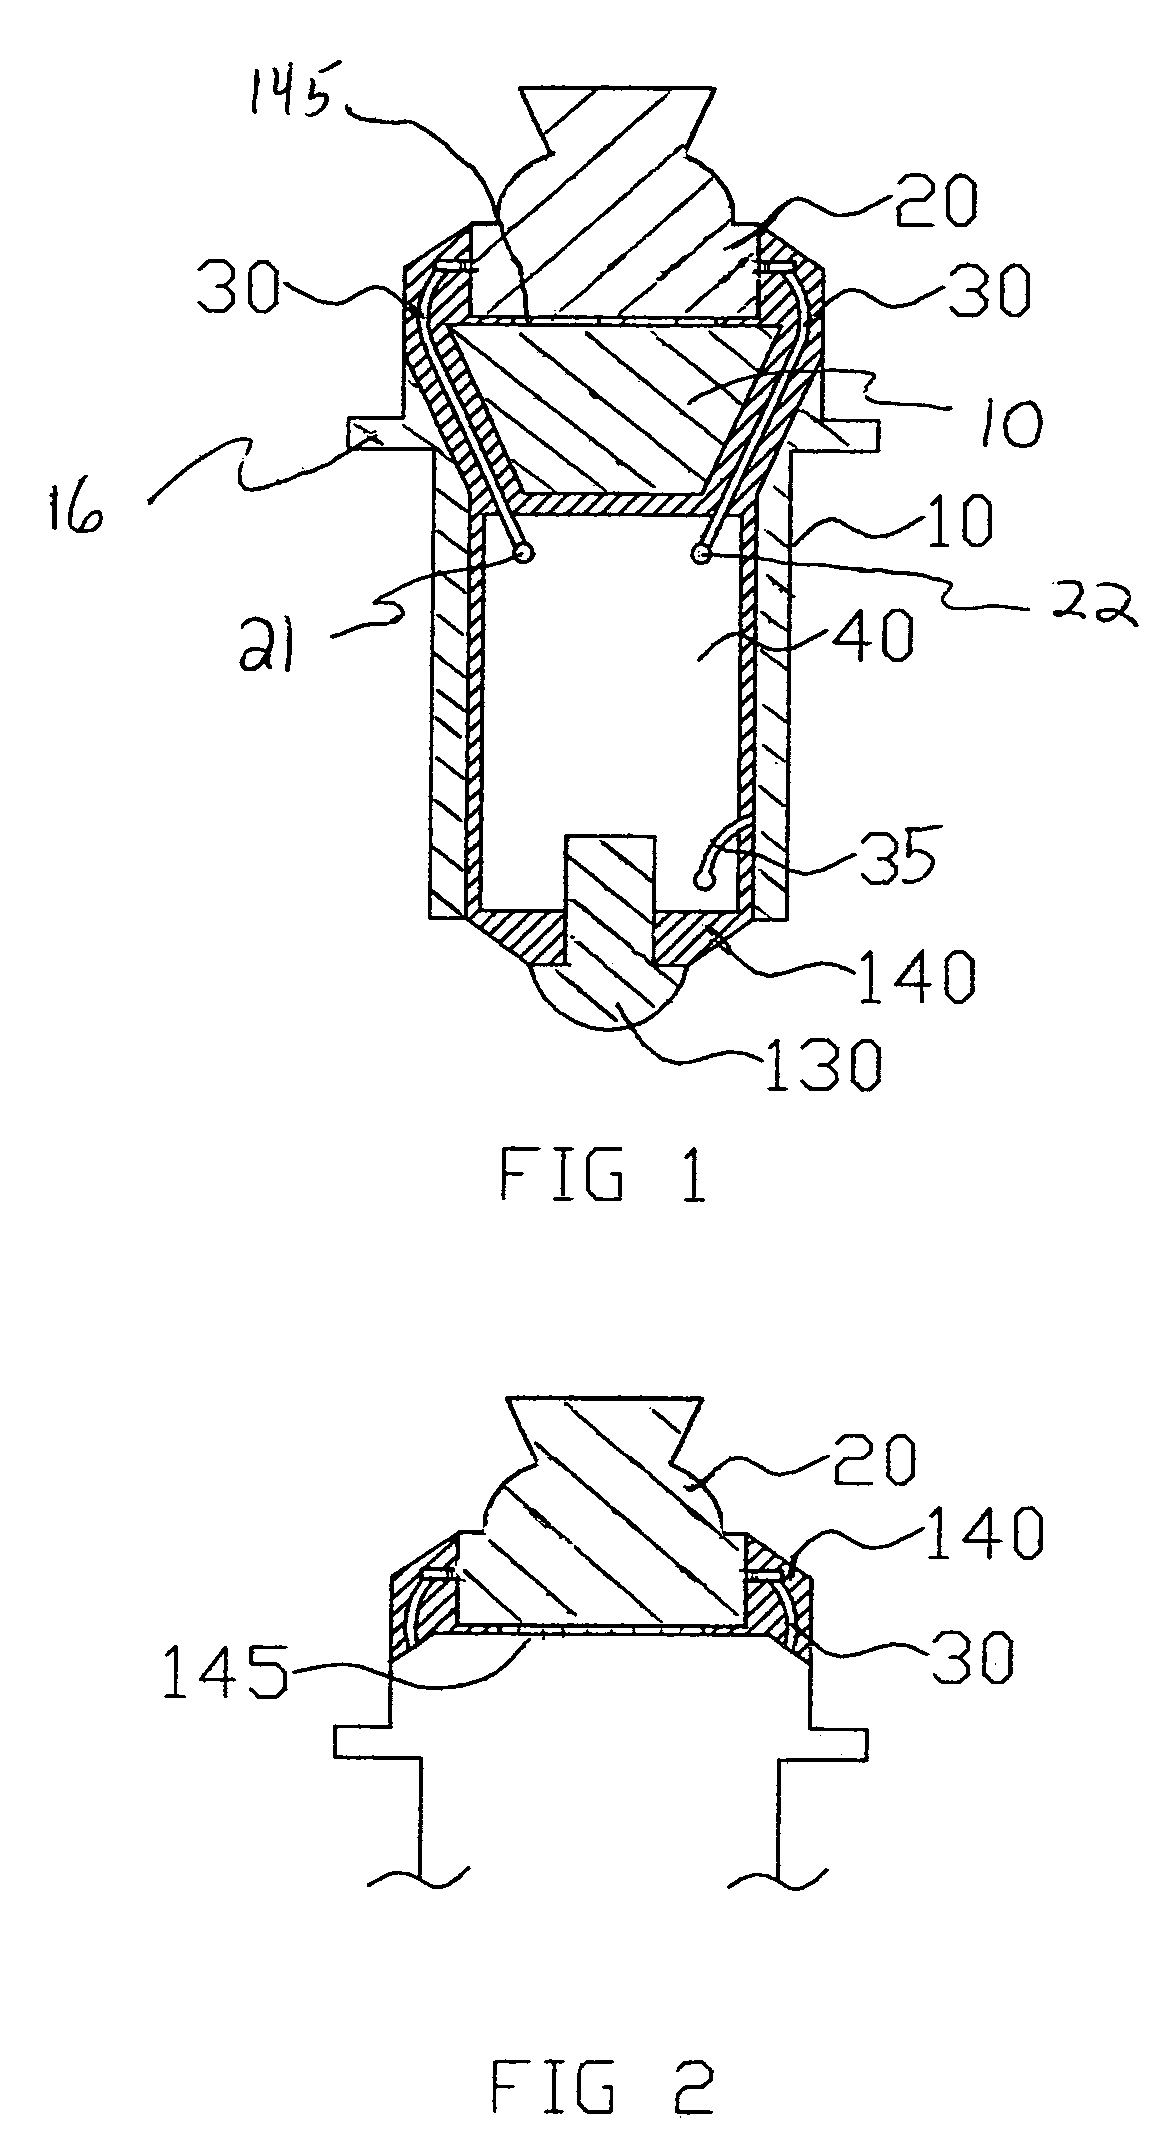 Circuit devices, circuit devices which include light emitting diodes, assemblies which include such circuit devices, flashlights which include such assemblies, and methods for directly replacing flashlight bulbs